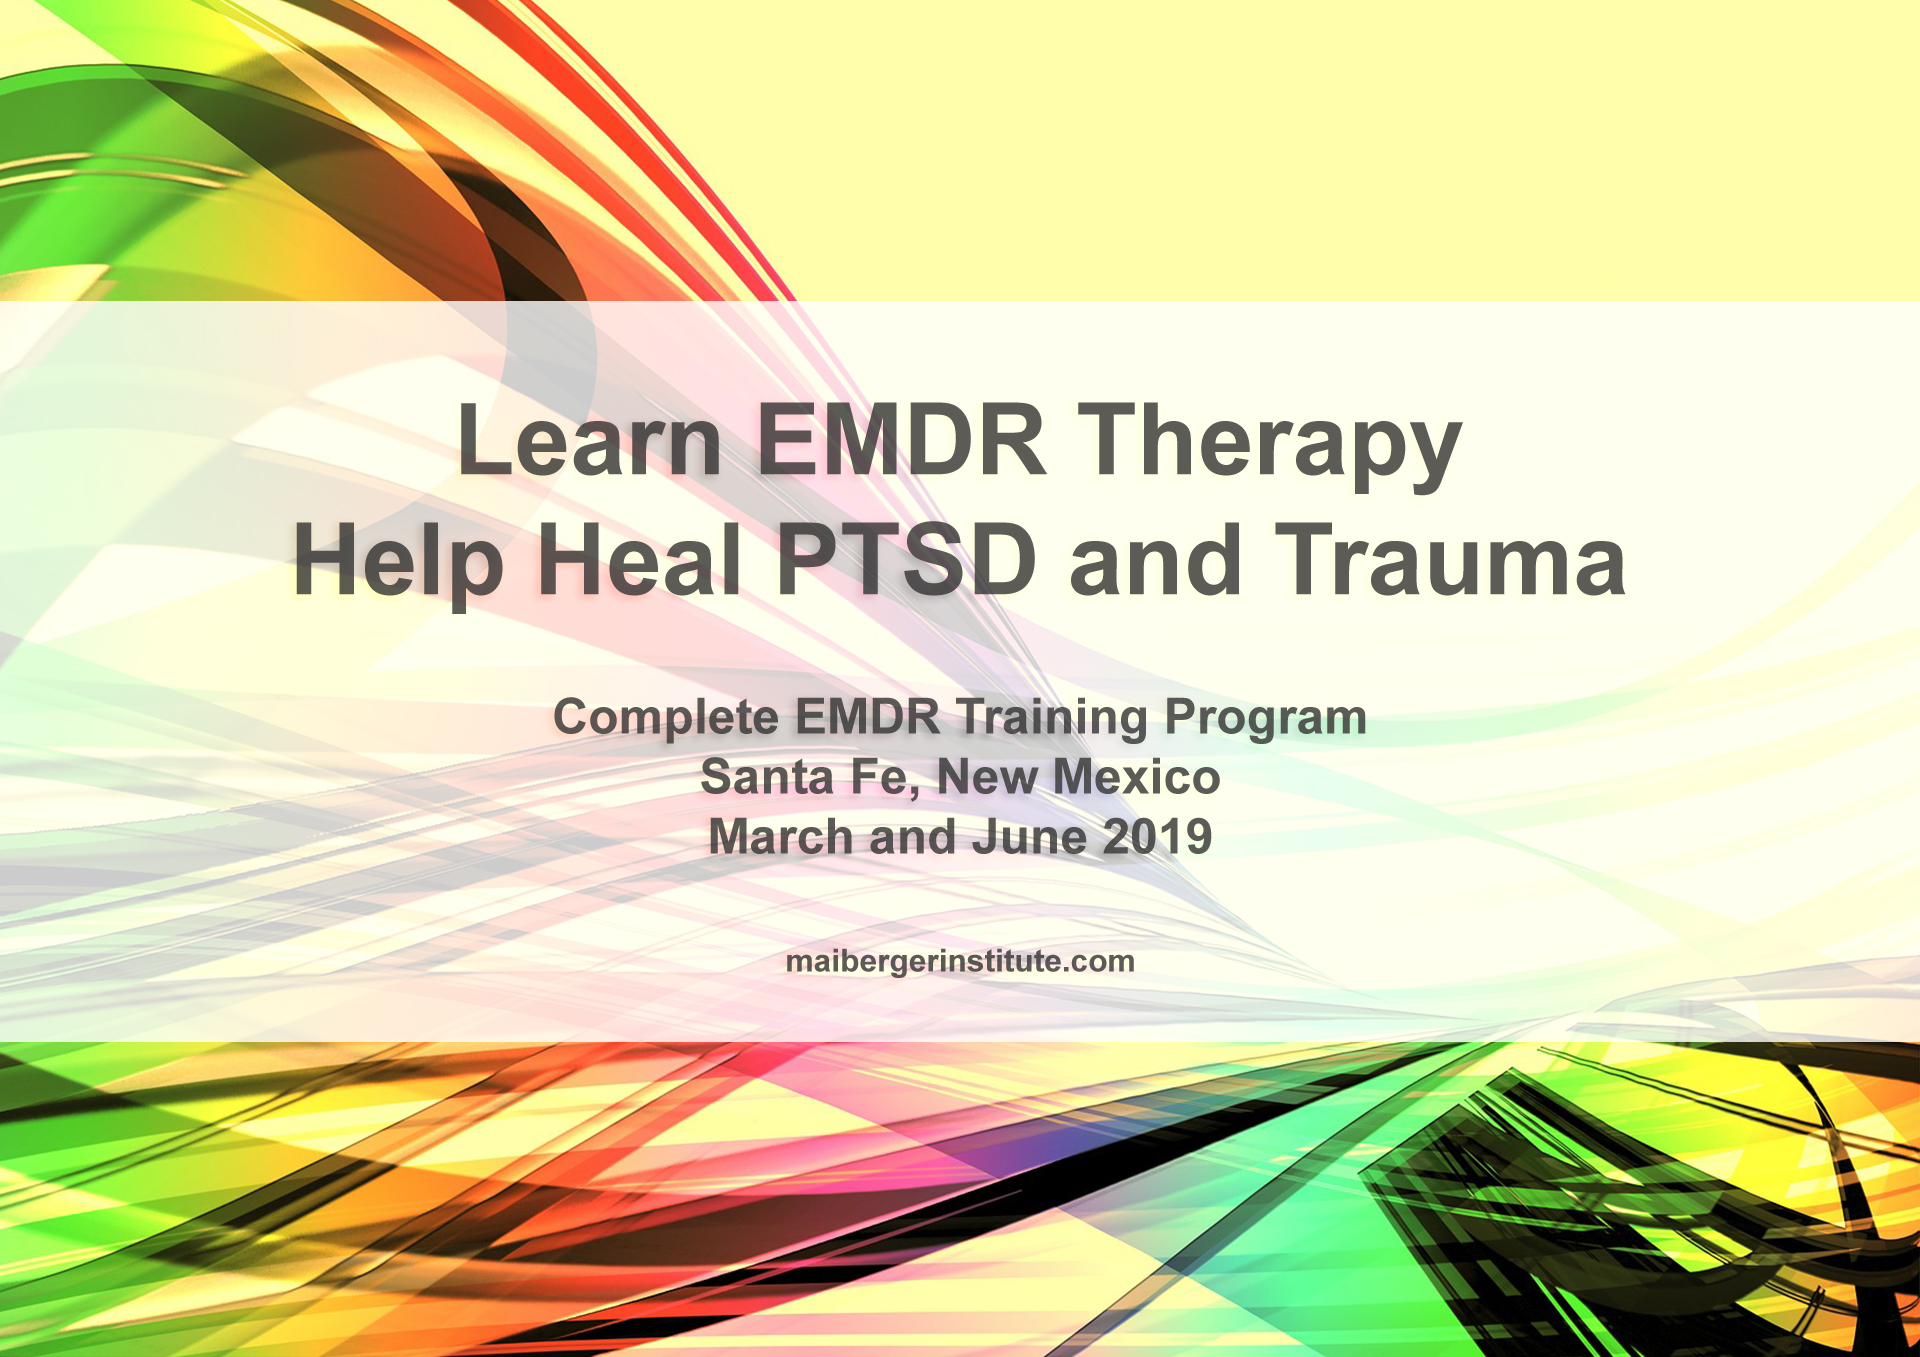 EMDR Training in Santa Fe, New Mexico - March and June 2019